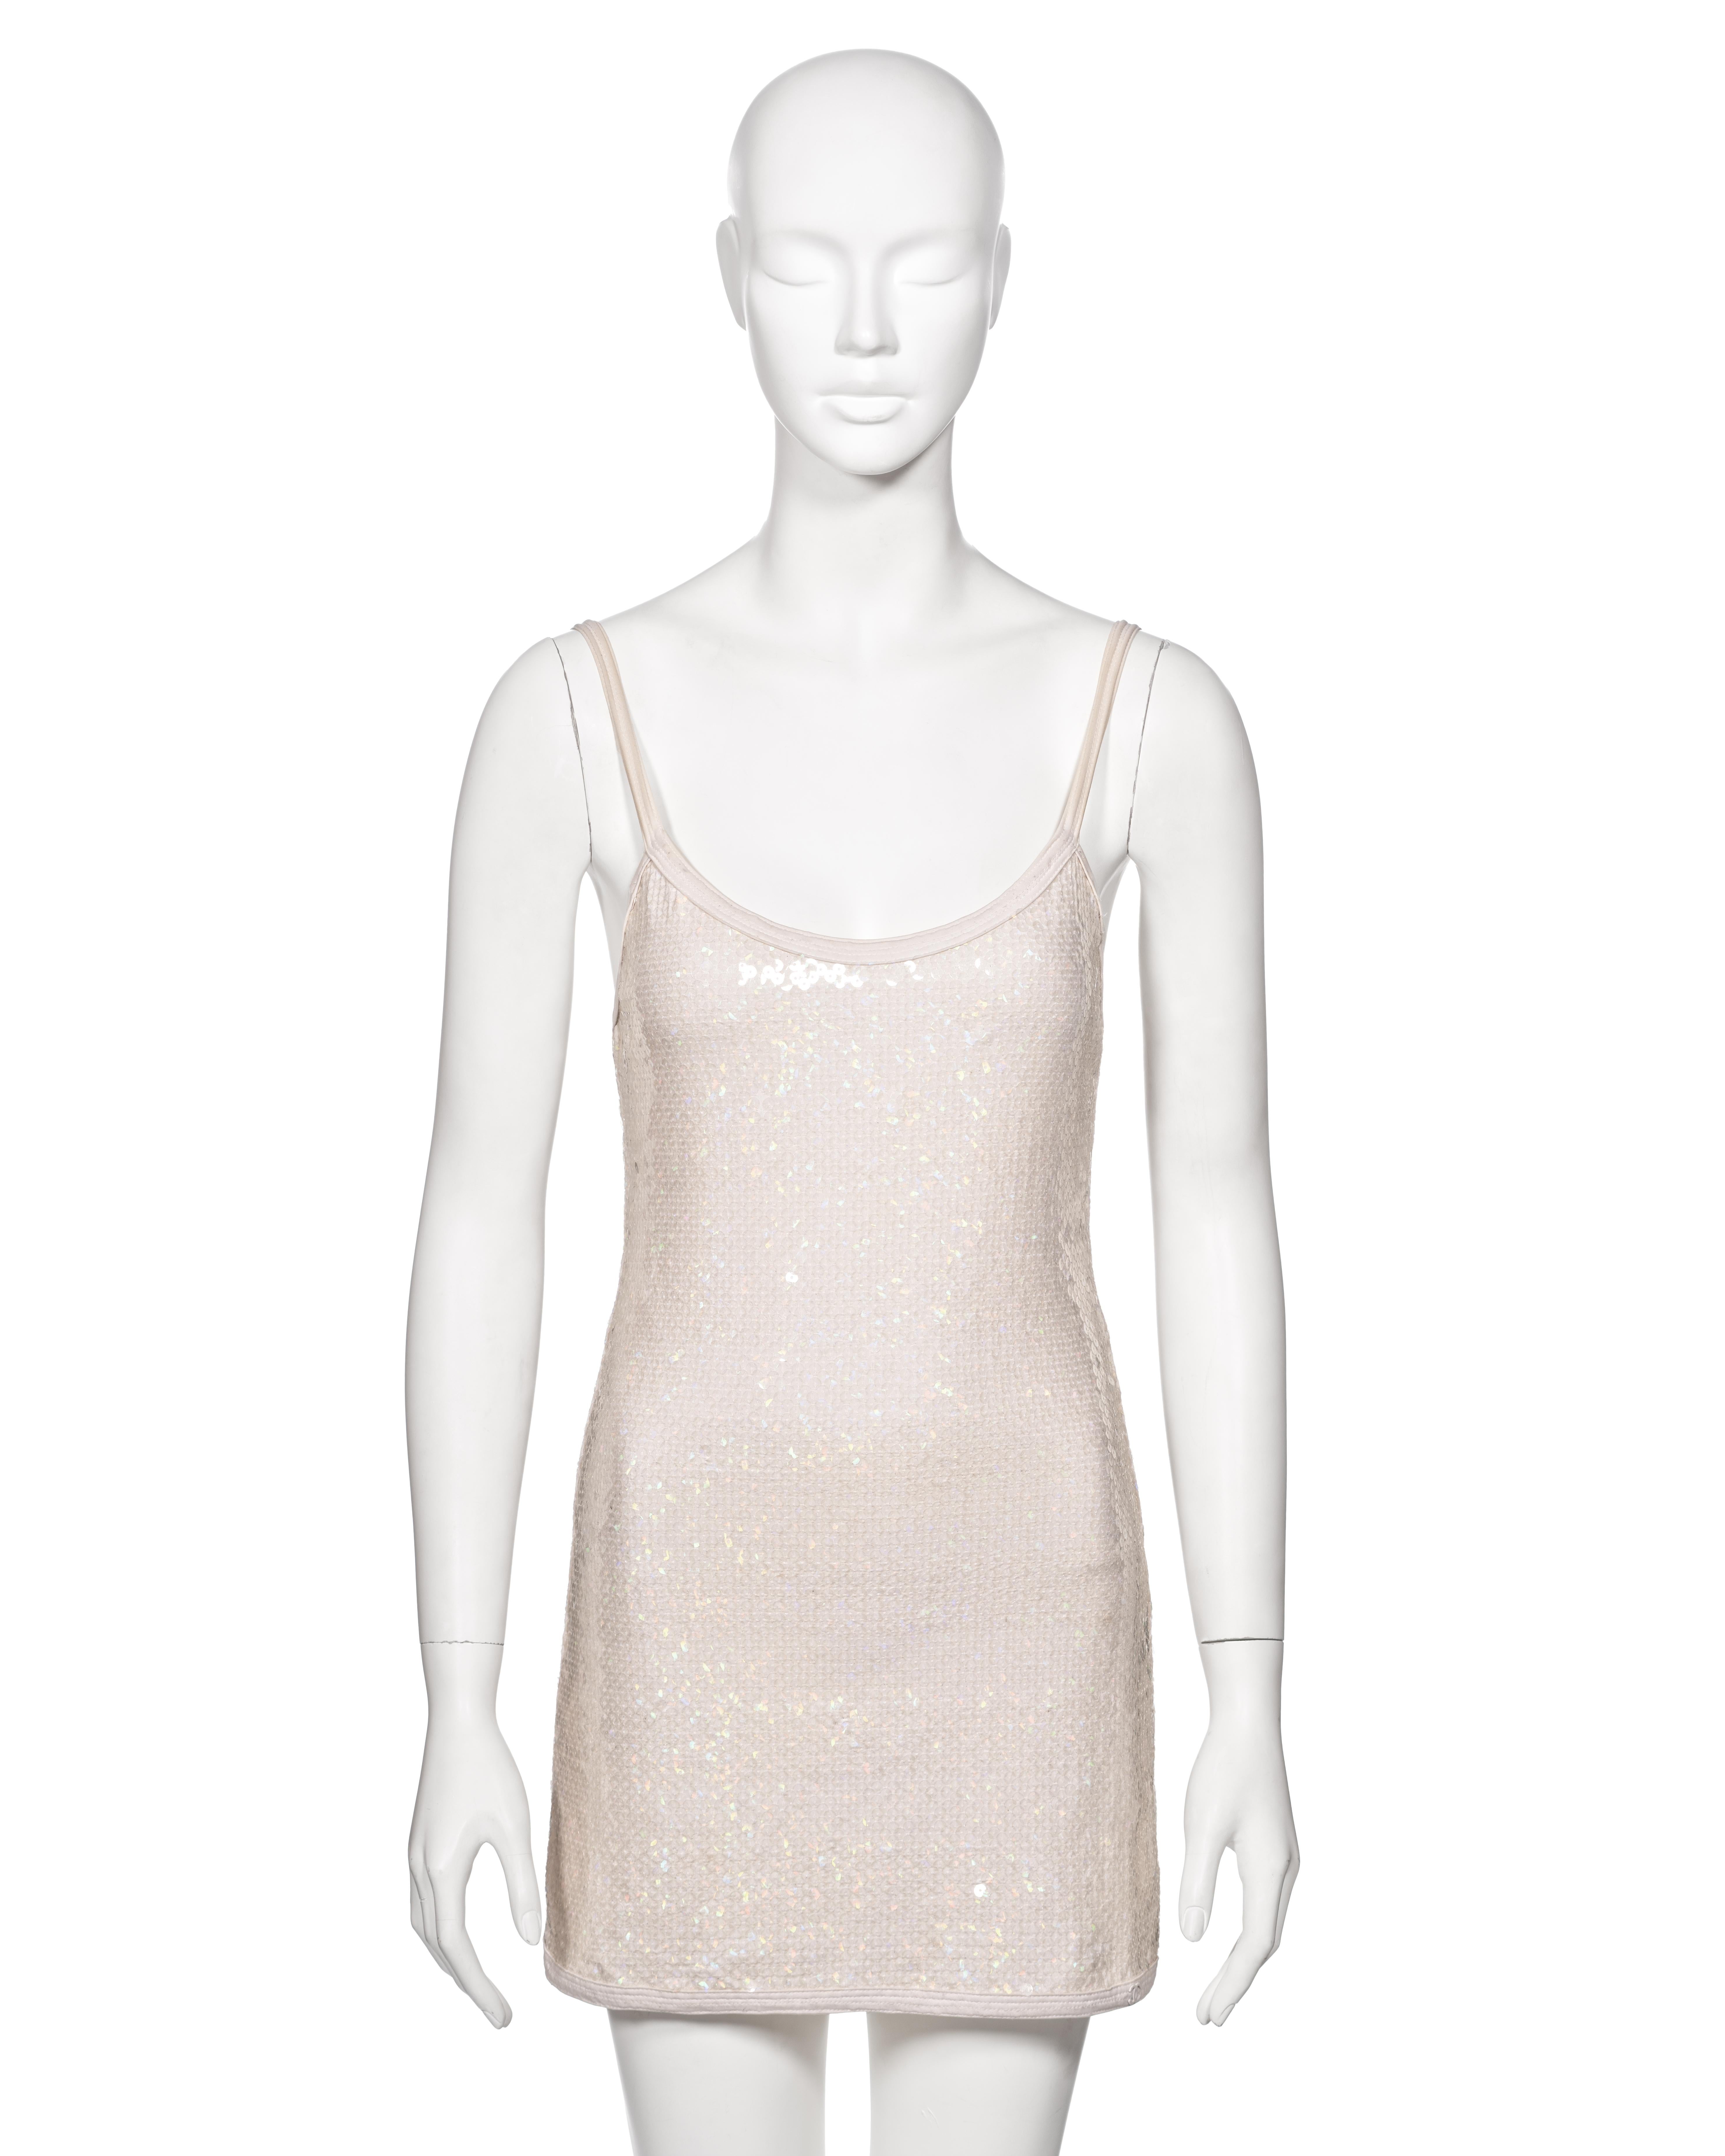 ▪ Chanel White Sequin Mini Dress
▪ Creative Director: Karl Lagerfeld 
▪ Spring-Summer 2005
▪ Sold by One of a Kind Archive
▪ Fashioned from white stretch lycra, embellished with clear iridescent sequins
▪ Features a classic scoop neckline paired